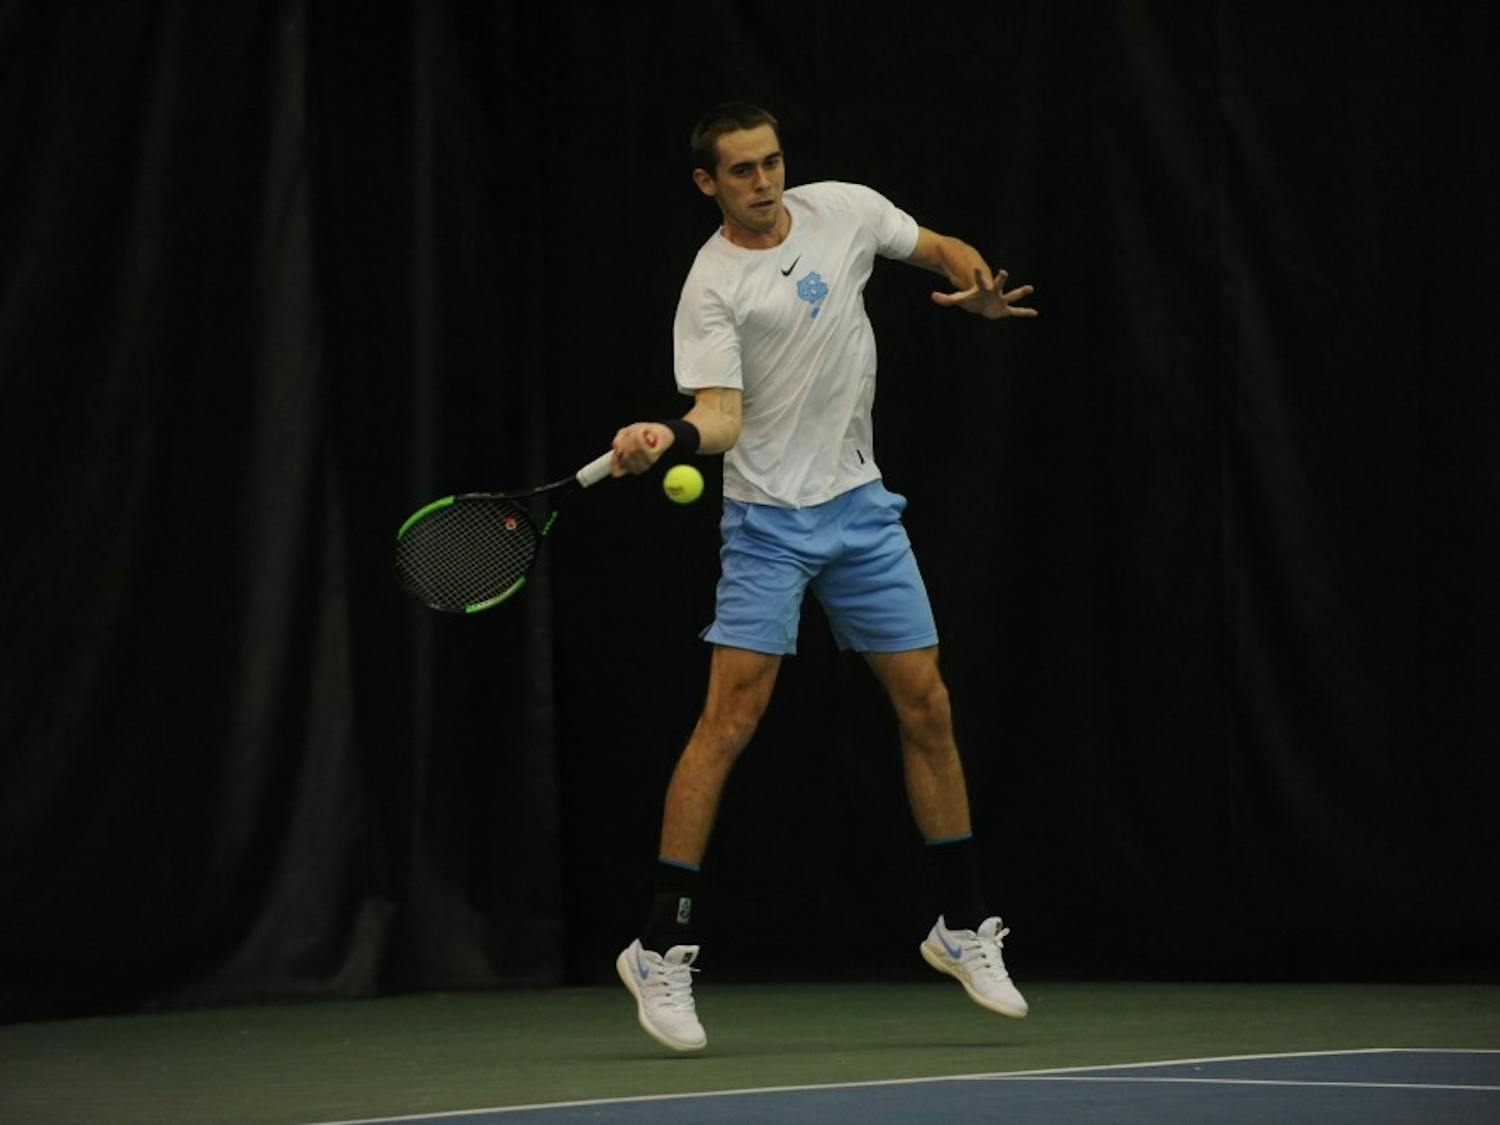 Sophomore Benjamin Sigouin, undeclared major, playing for the UNC men's tennis team against Duke on Jan. 26, 2019, in the Cone-Kenfield Tennis Center. UNC won 4-1 against Duke.